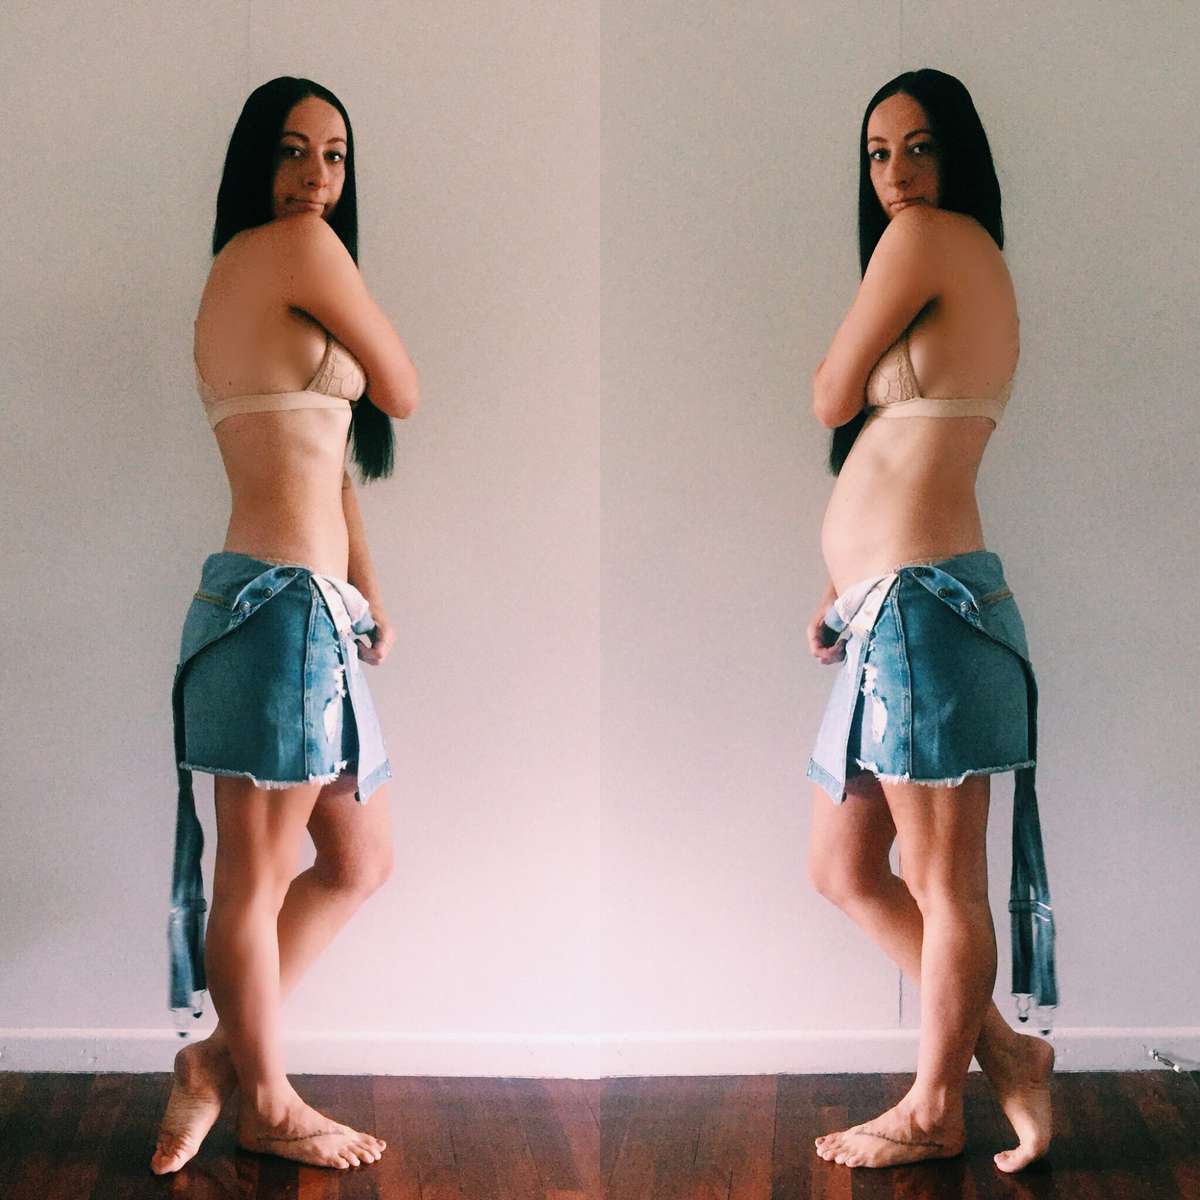 4 Women Share Intimate Photos to Reveal a Little-Known Symptom of Endometriosis